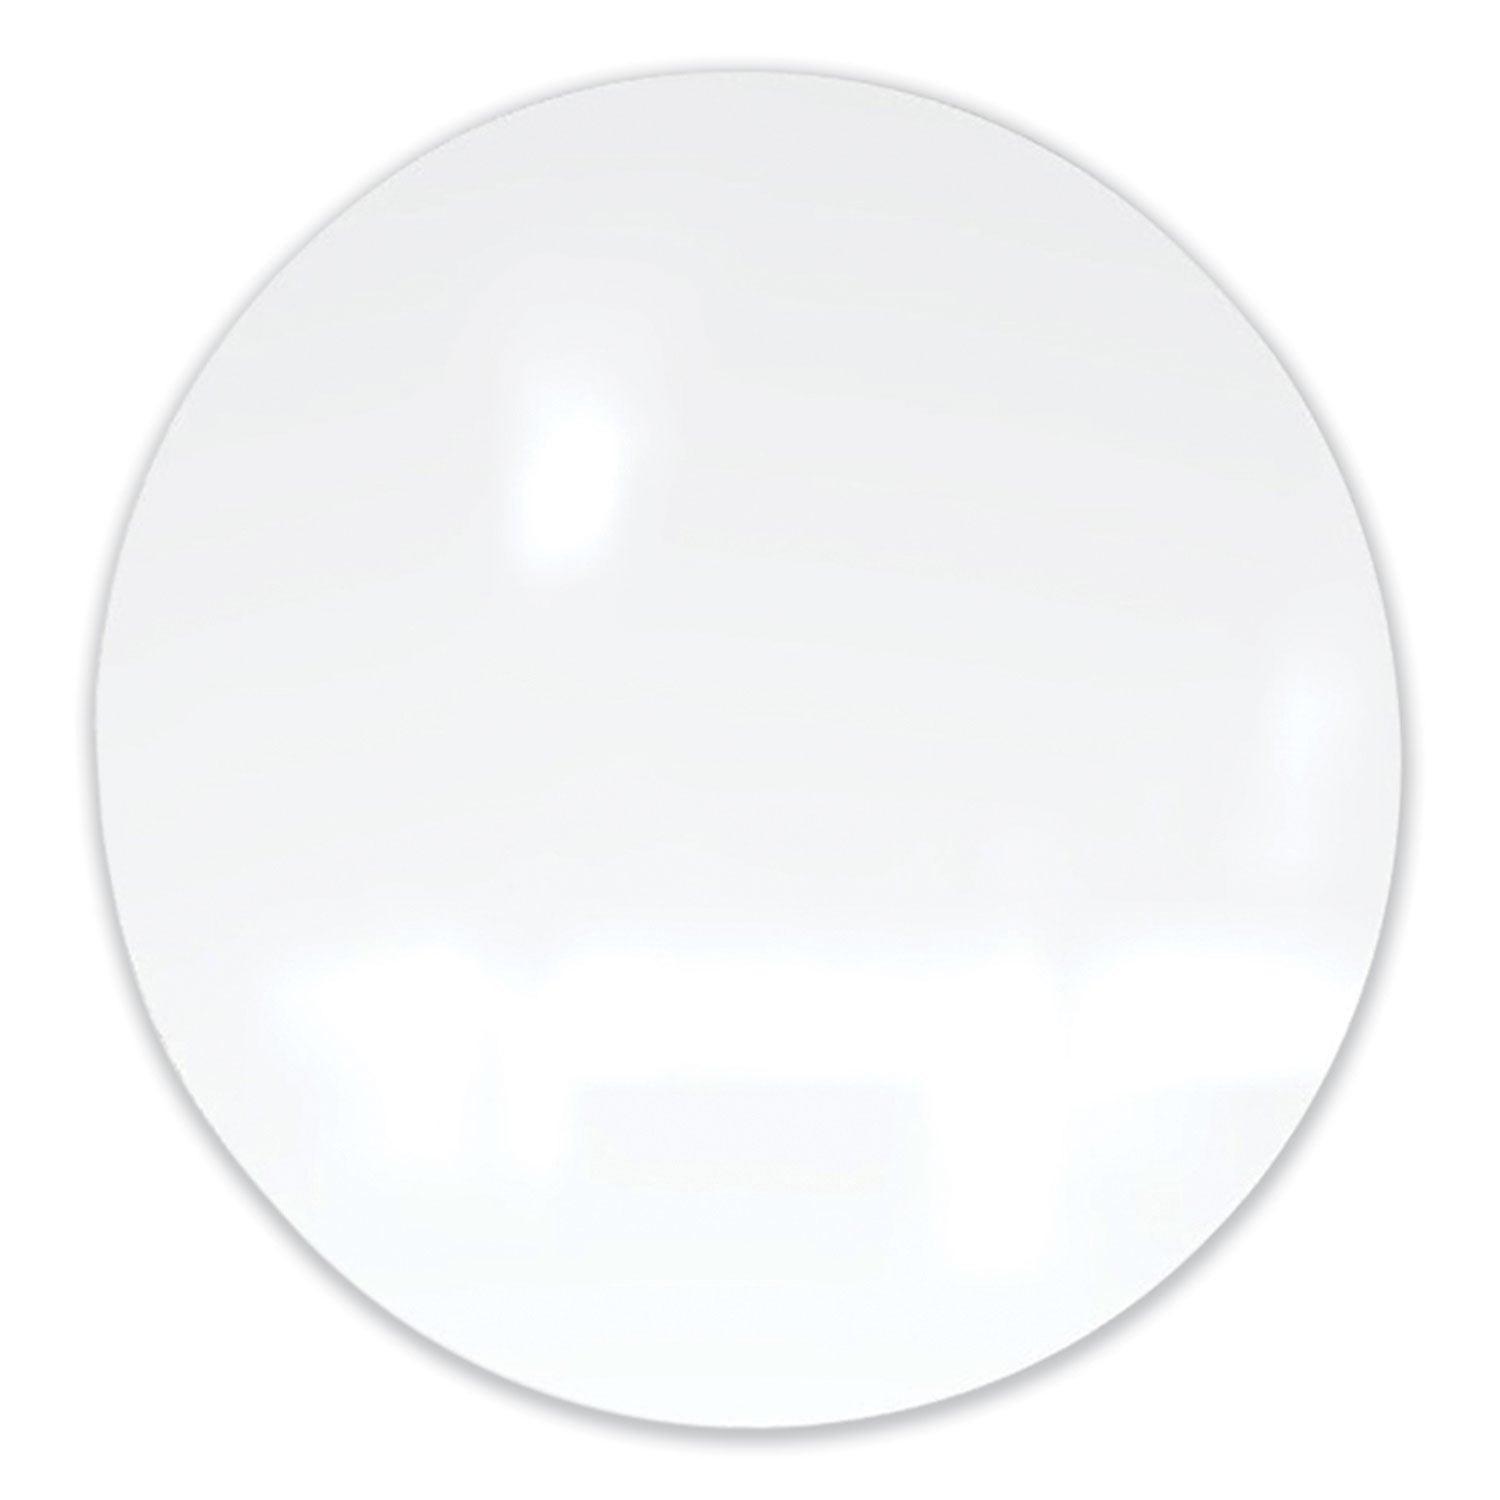 coda-low-profile-circular-magnetic-glassboard-36-diameter-white-surface-ships-in-7-10-business-days_ghecdagm36wh - 1